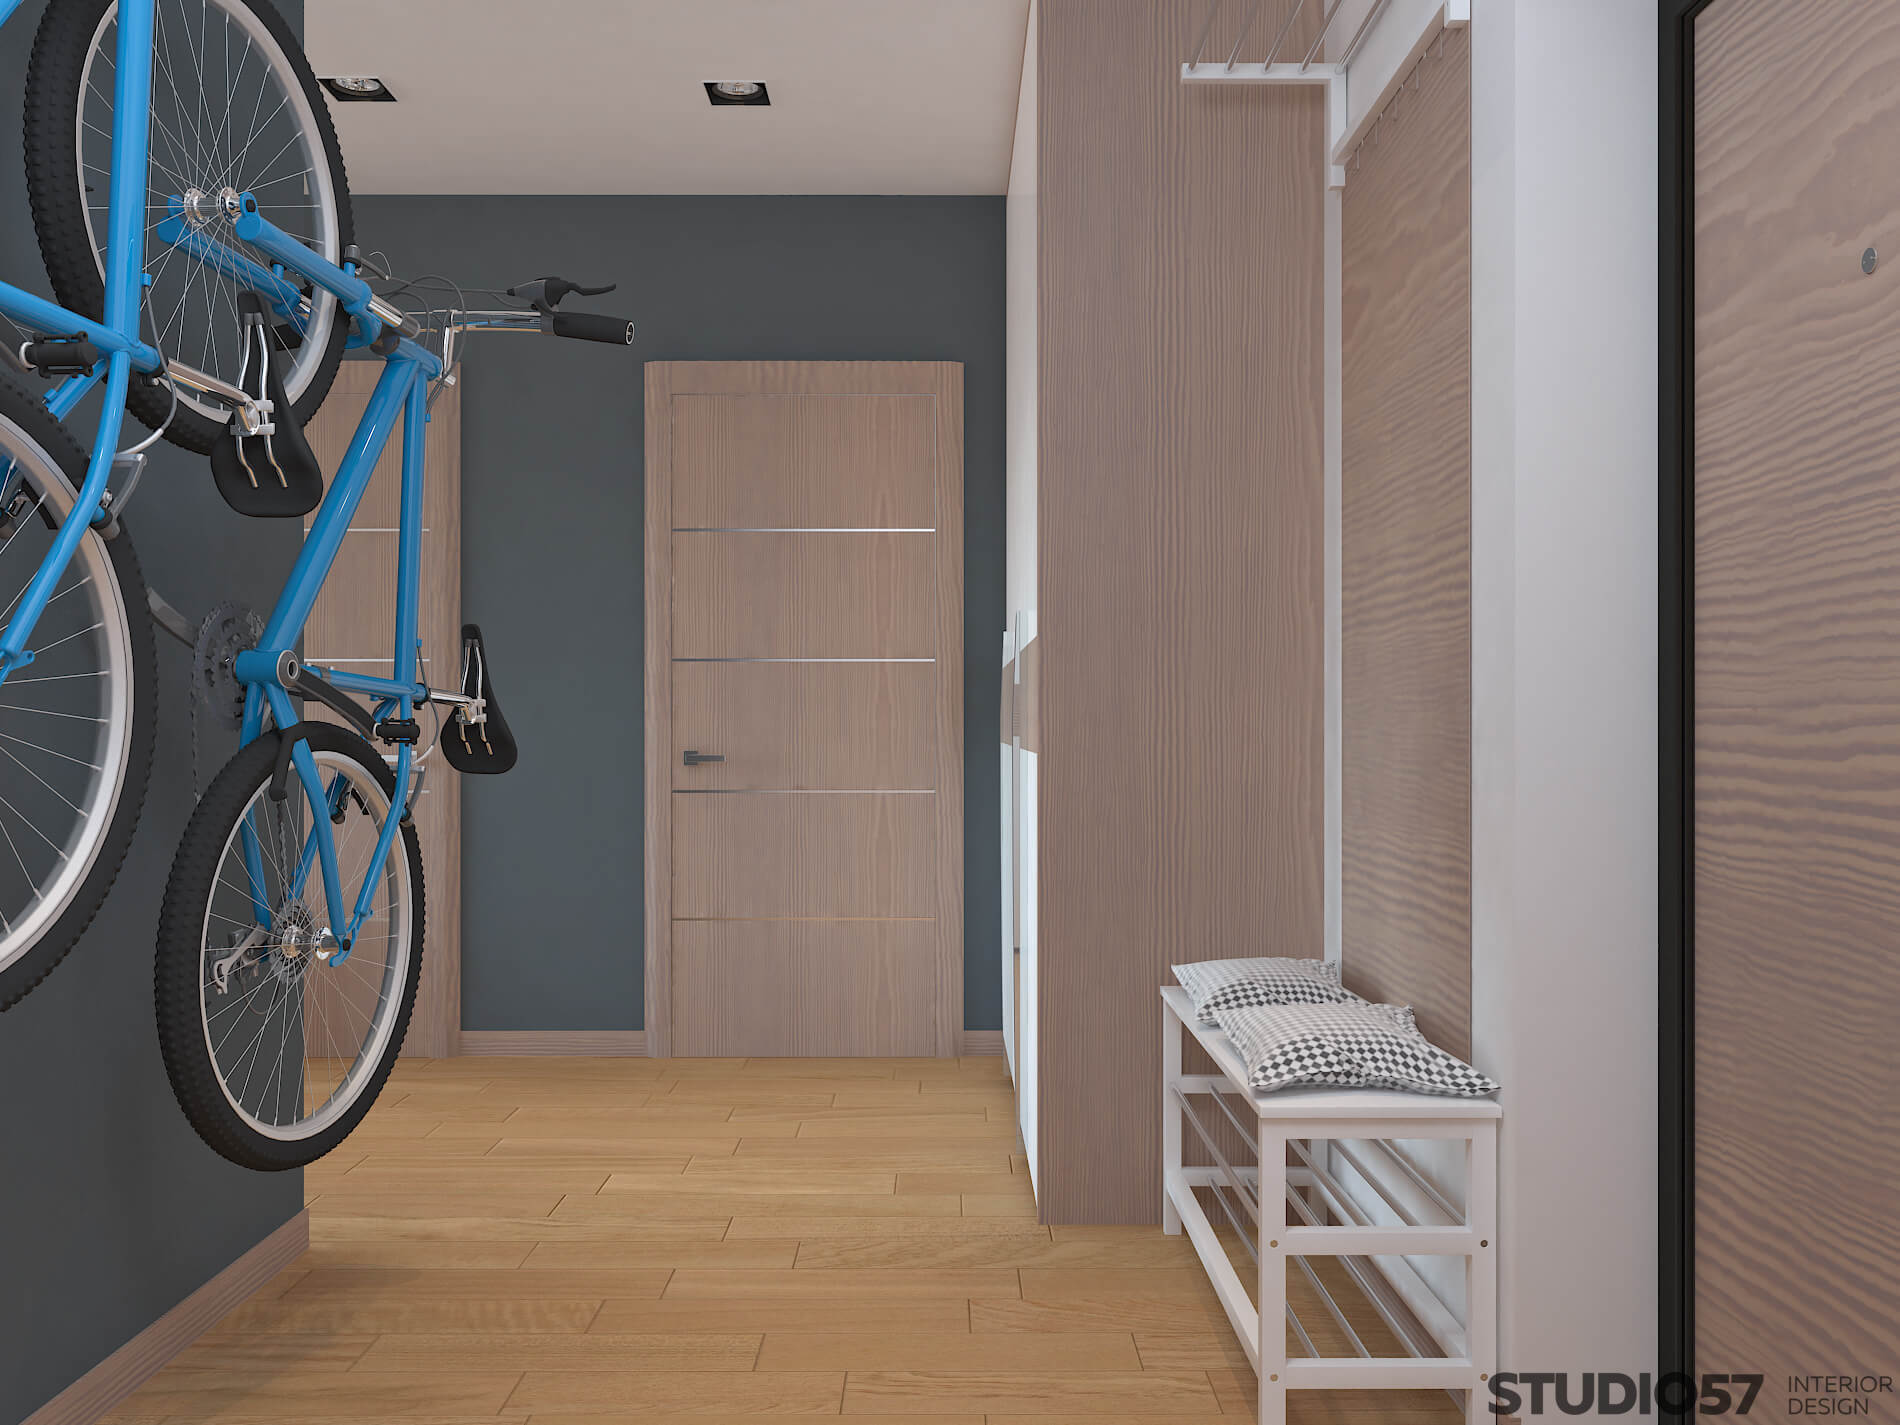 How to place a bike in the hallway